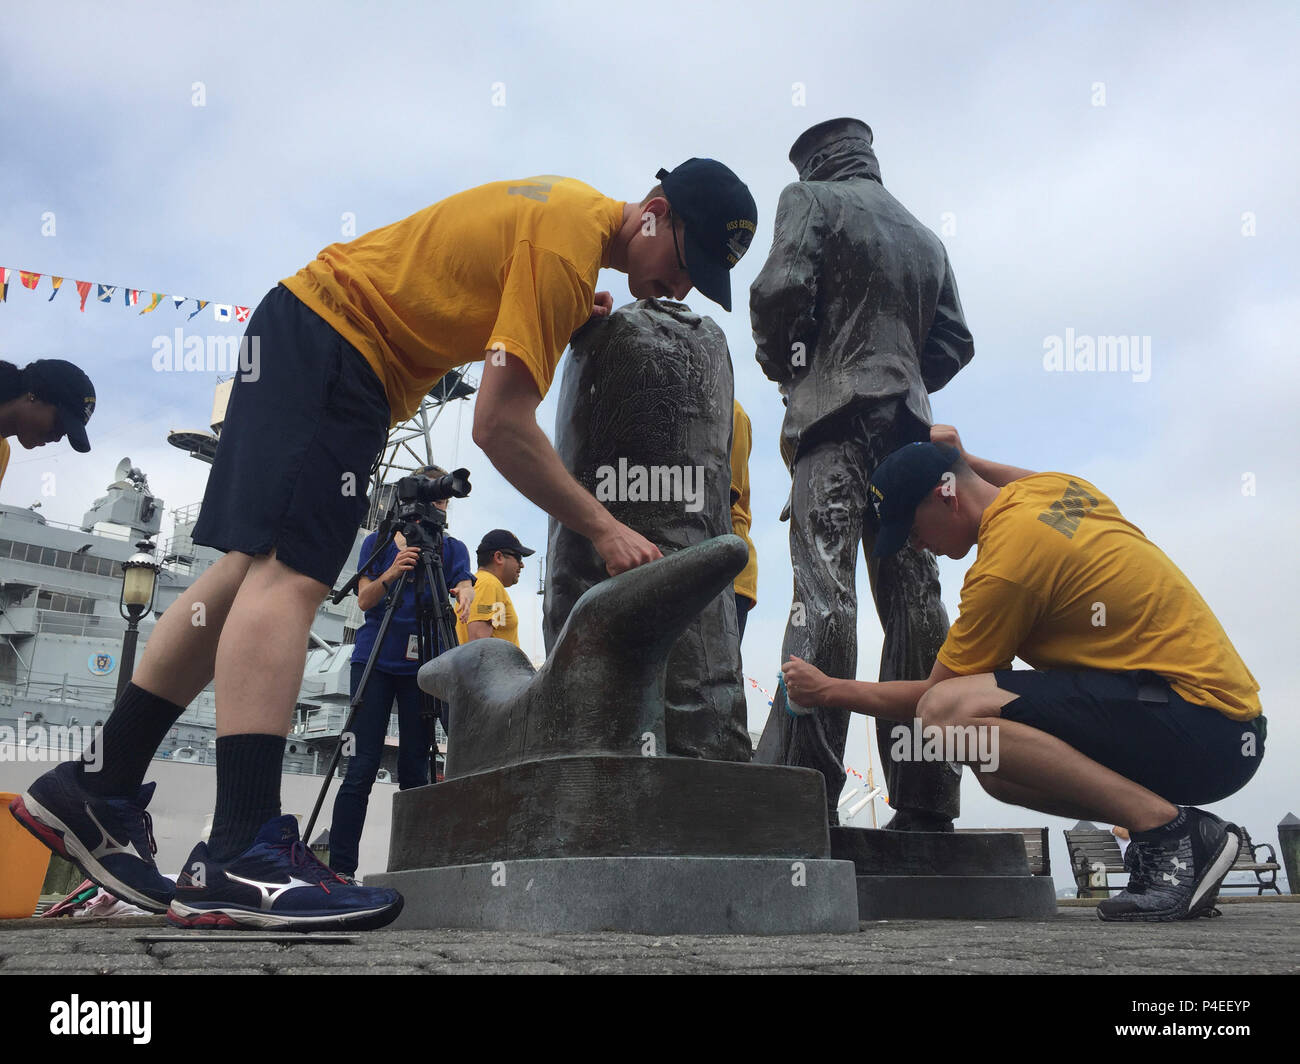 180618-N-VU442-0005 NORFOLK, Virginia (June 18, 2018) Sailors assigned to the aircraft carrier USS George H.W. Bush (CVN 77) clean the “Lone Sailor” statue at Norfolk’s Town Point Park. As a birthday tribute to the ship’s namesake, and representing his famous “Thousand Points of Light” speech, approximately 1,000 GHWB crew members took part in one of the largest single-day community relation (COMREL) events at 44 different locations throughout the Hampton Roads area. George H.W. Bush turned 94 on June 12. (U.S. Navy photo by Senior Chief Mass Communication Specialist Mike Jones) Stock Photo